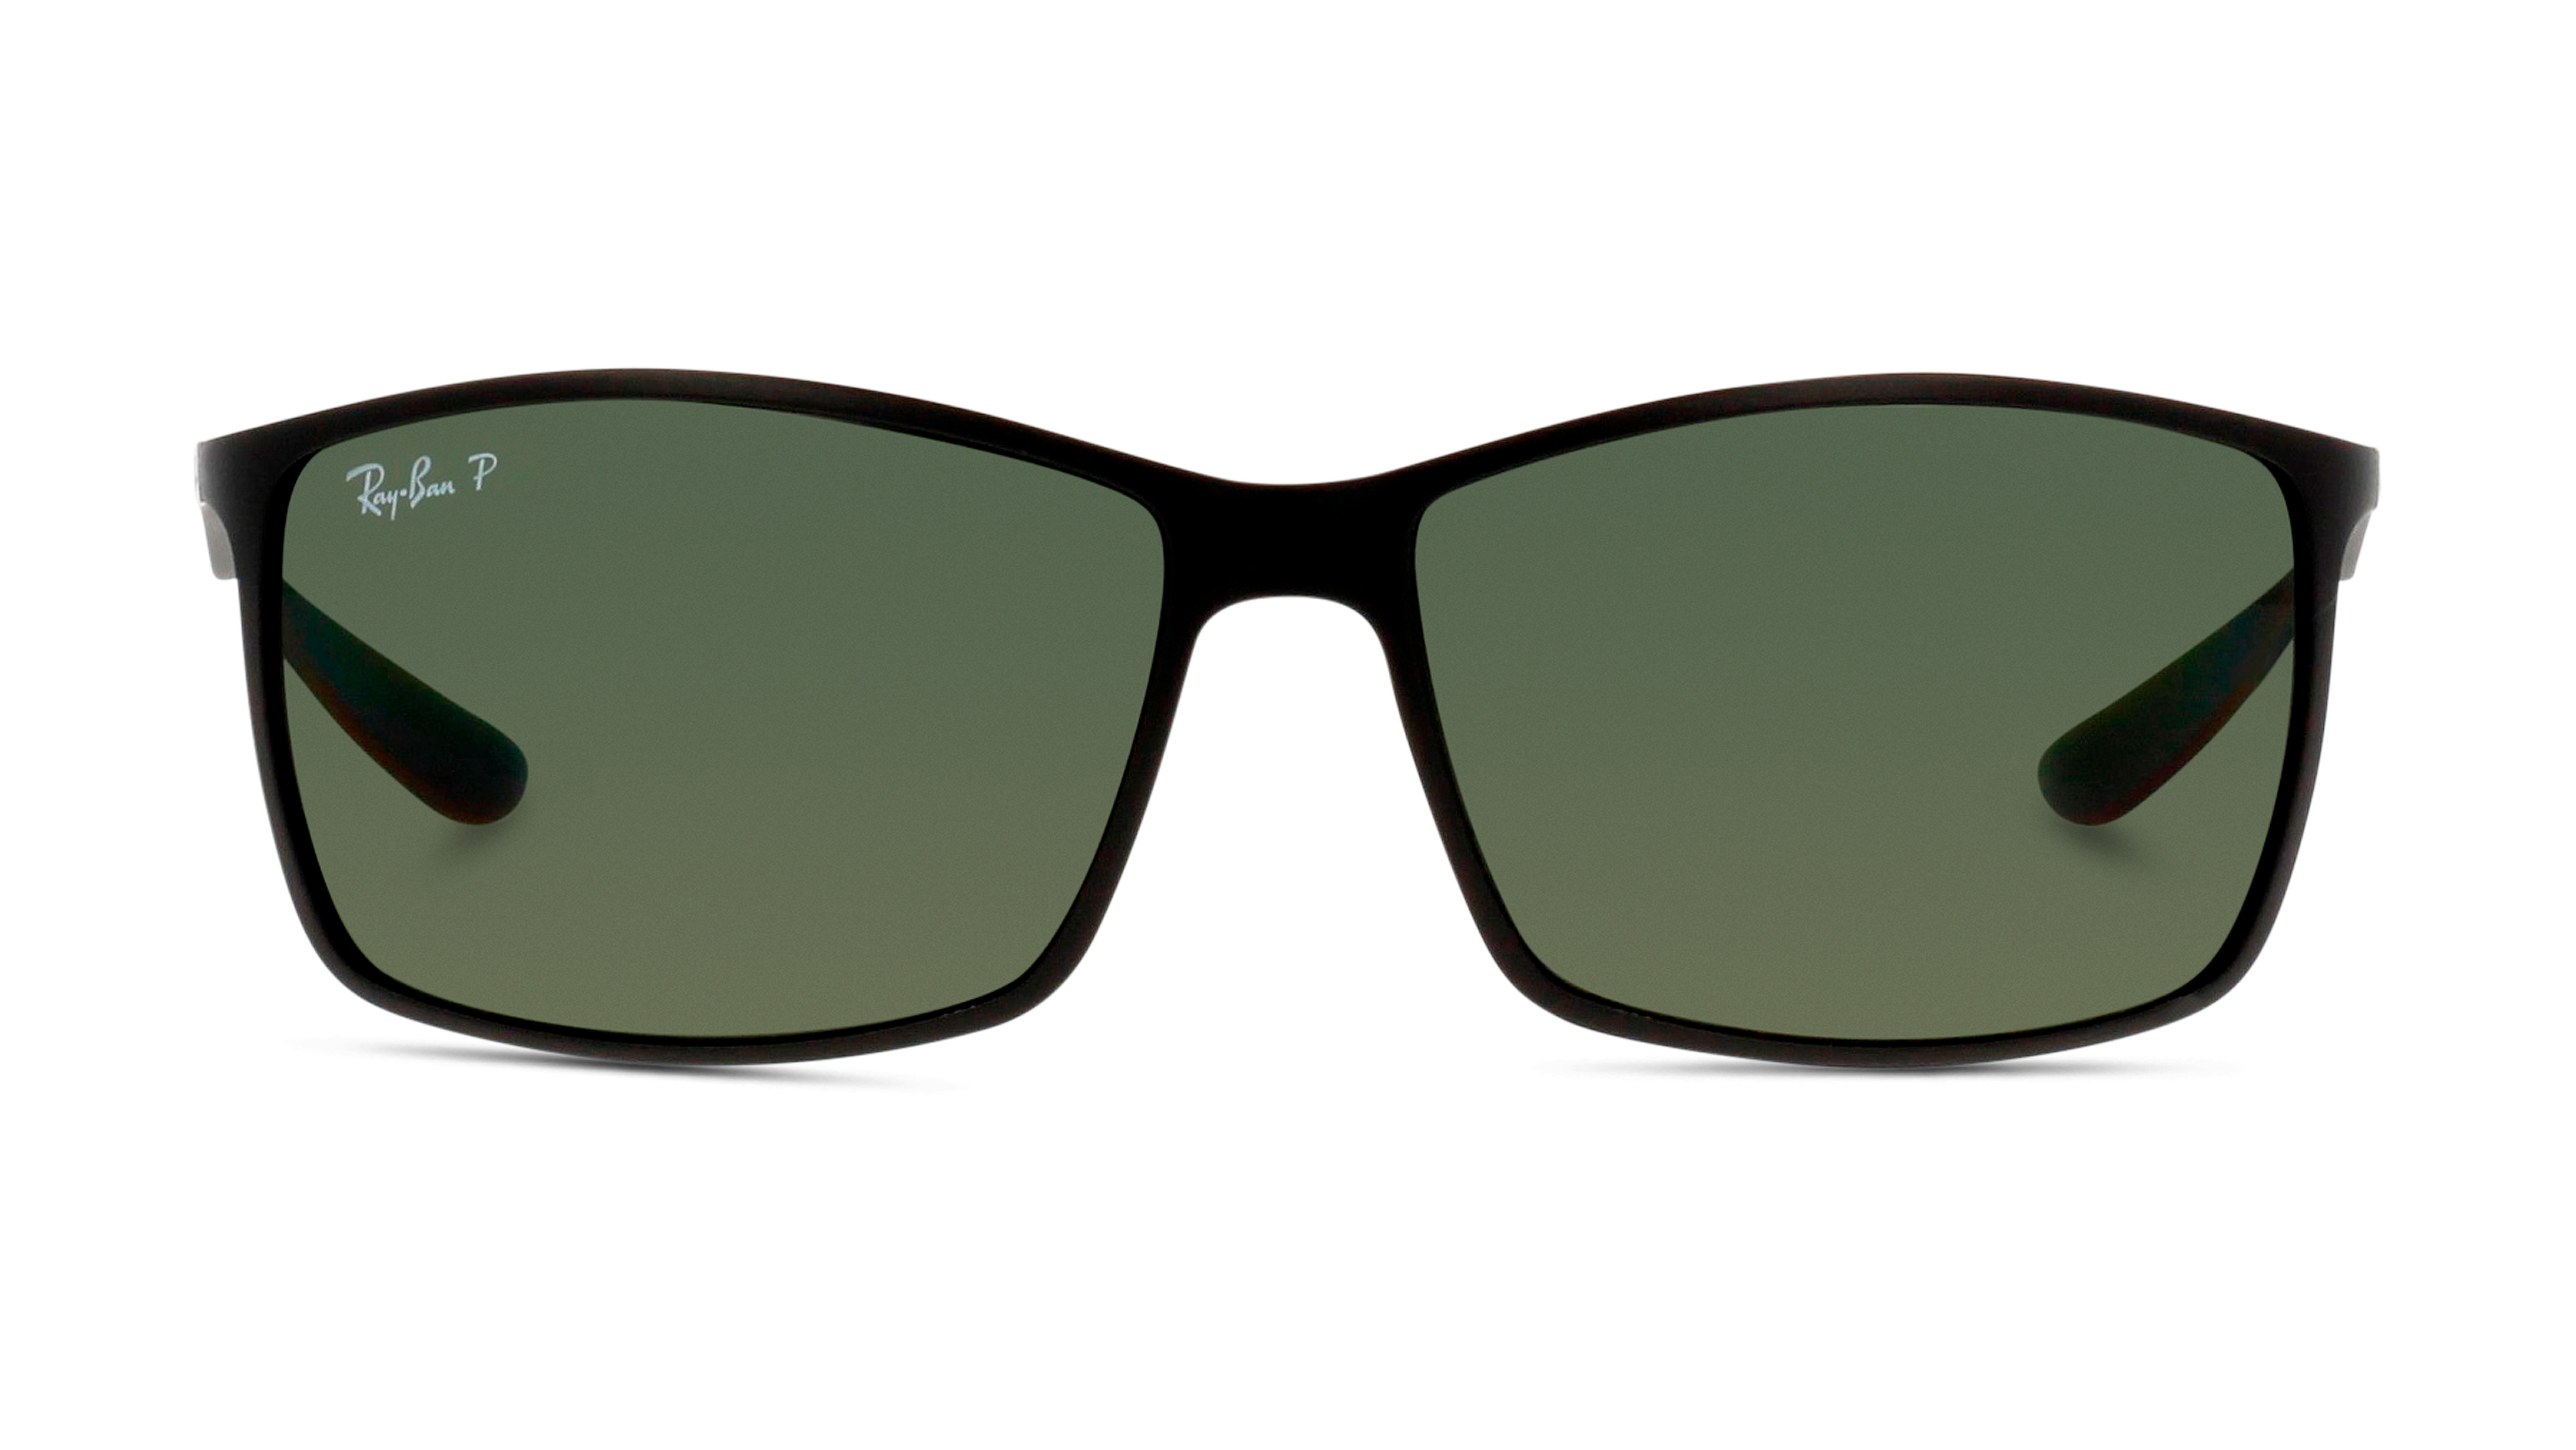 [products.image.front] Ray-Ban LITEFORCE 0RB4179 601S9A Sonnenbrille